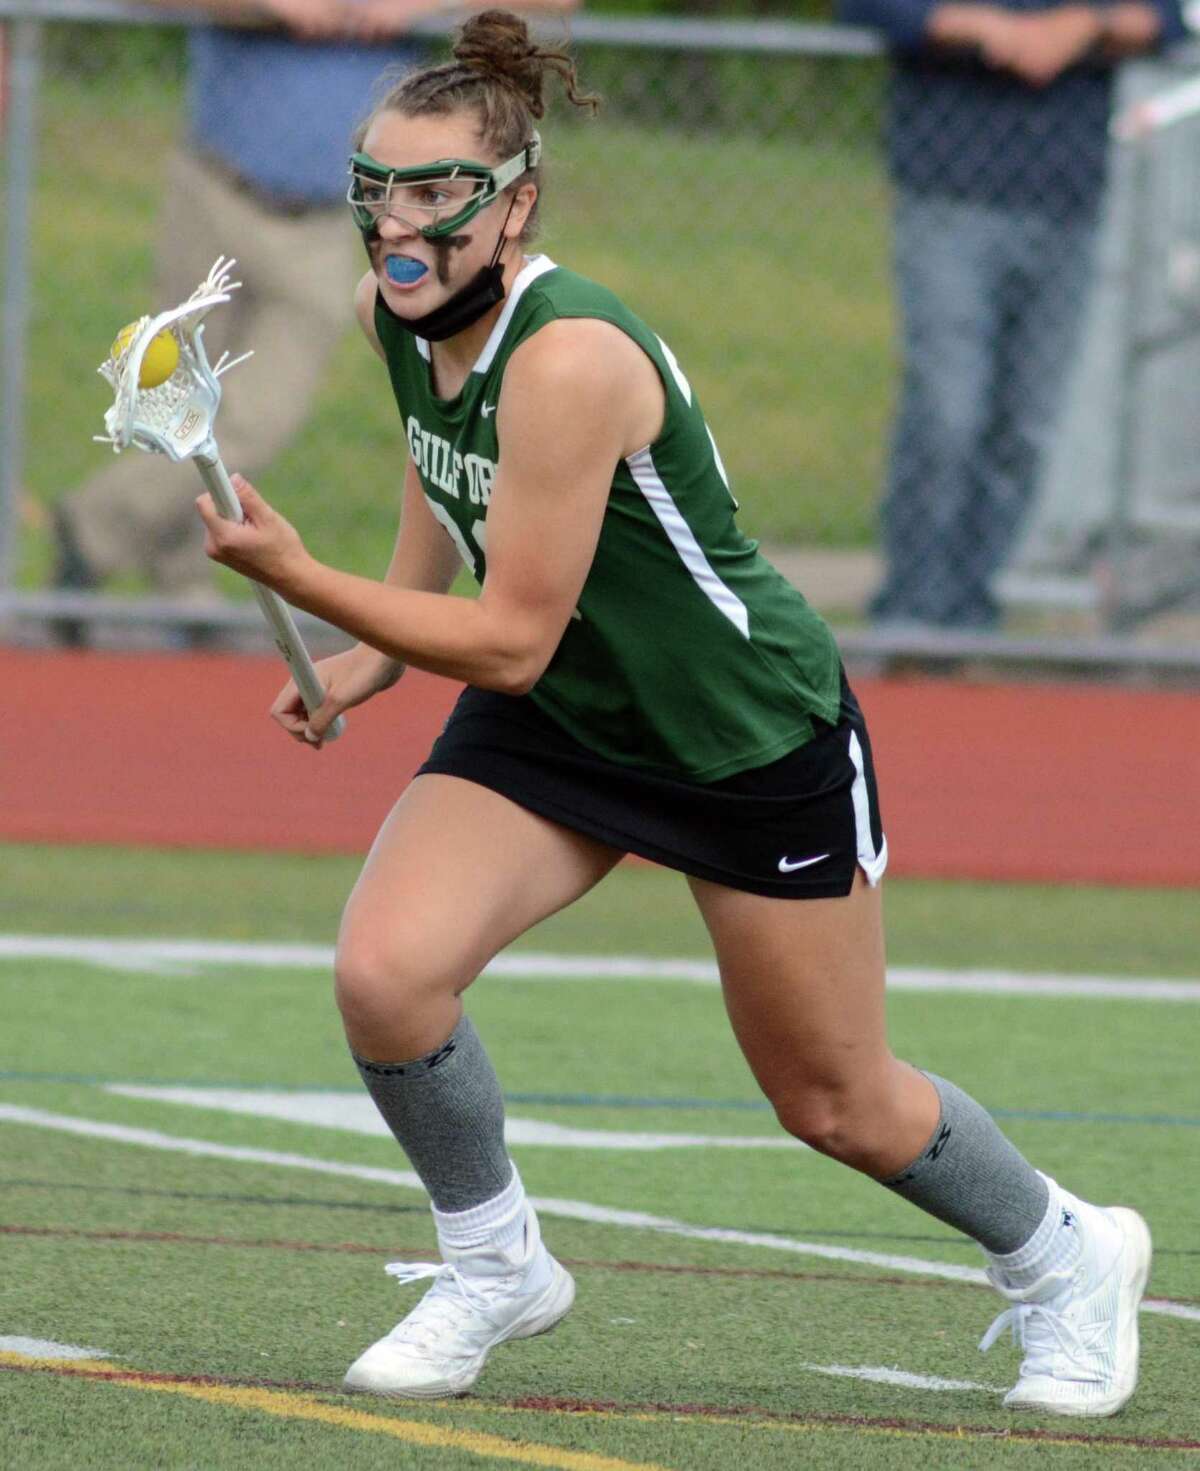 Guilford's Maddie Epke was named the Connecticut Sports Writers' Alliance Female Athlete of the Year.